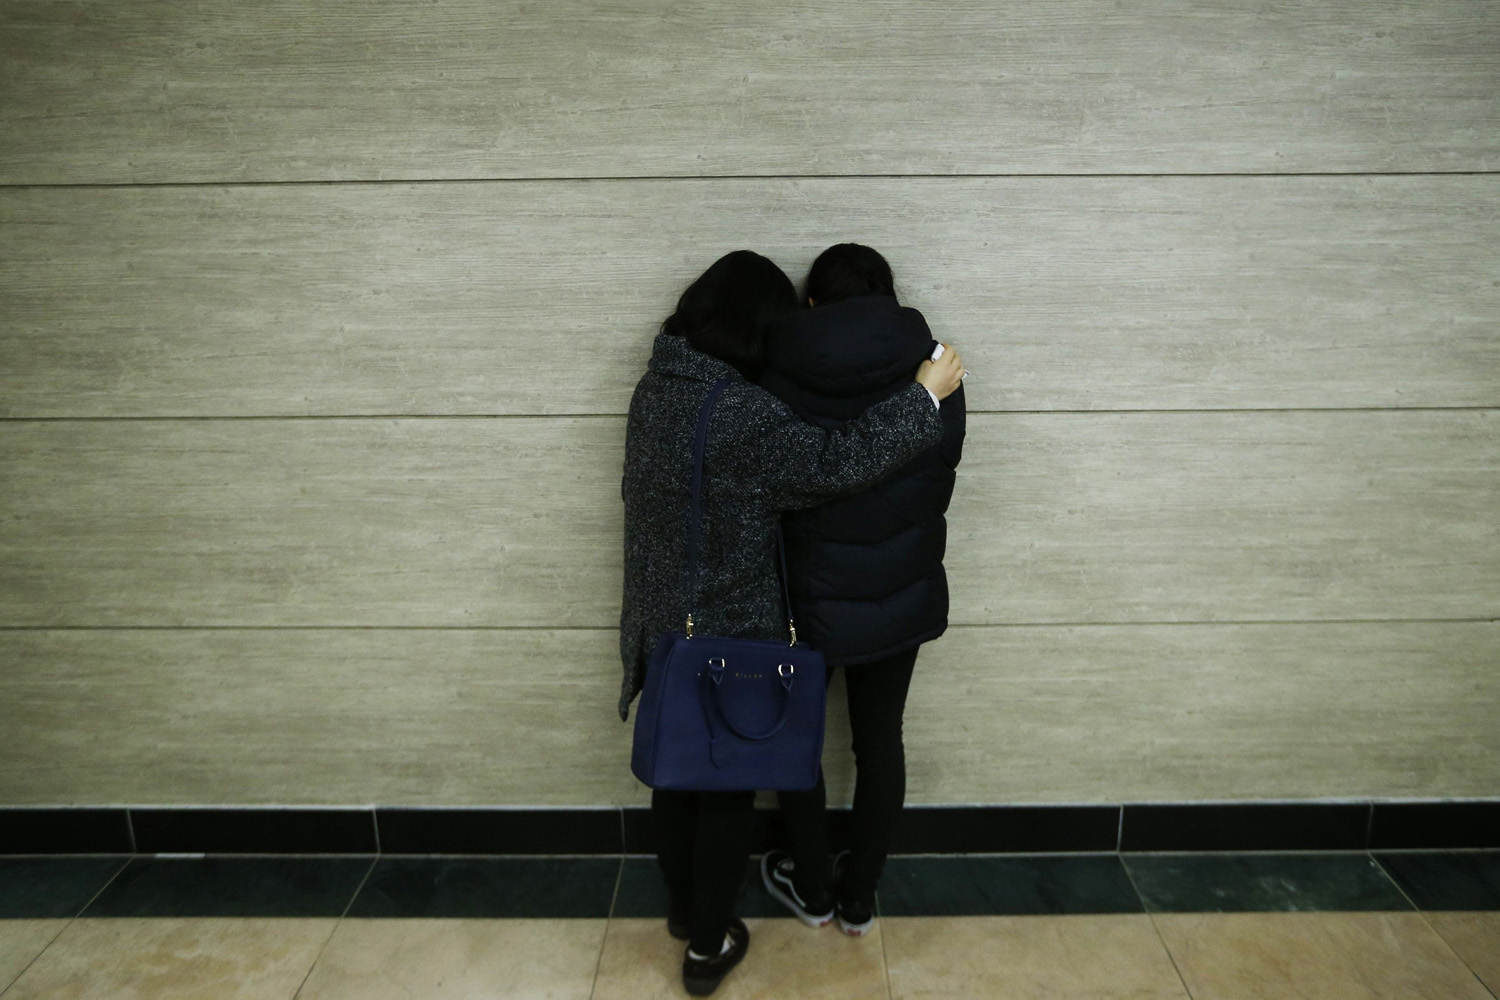 Relatives of victims who were killed when a resort building collapsed, comfort each other at a group memorial altar in Gyeongju